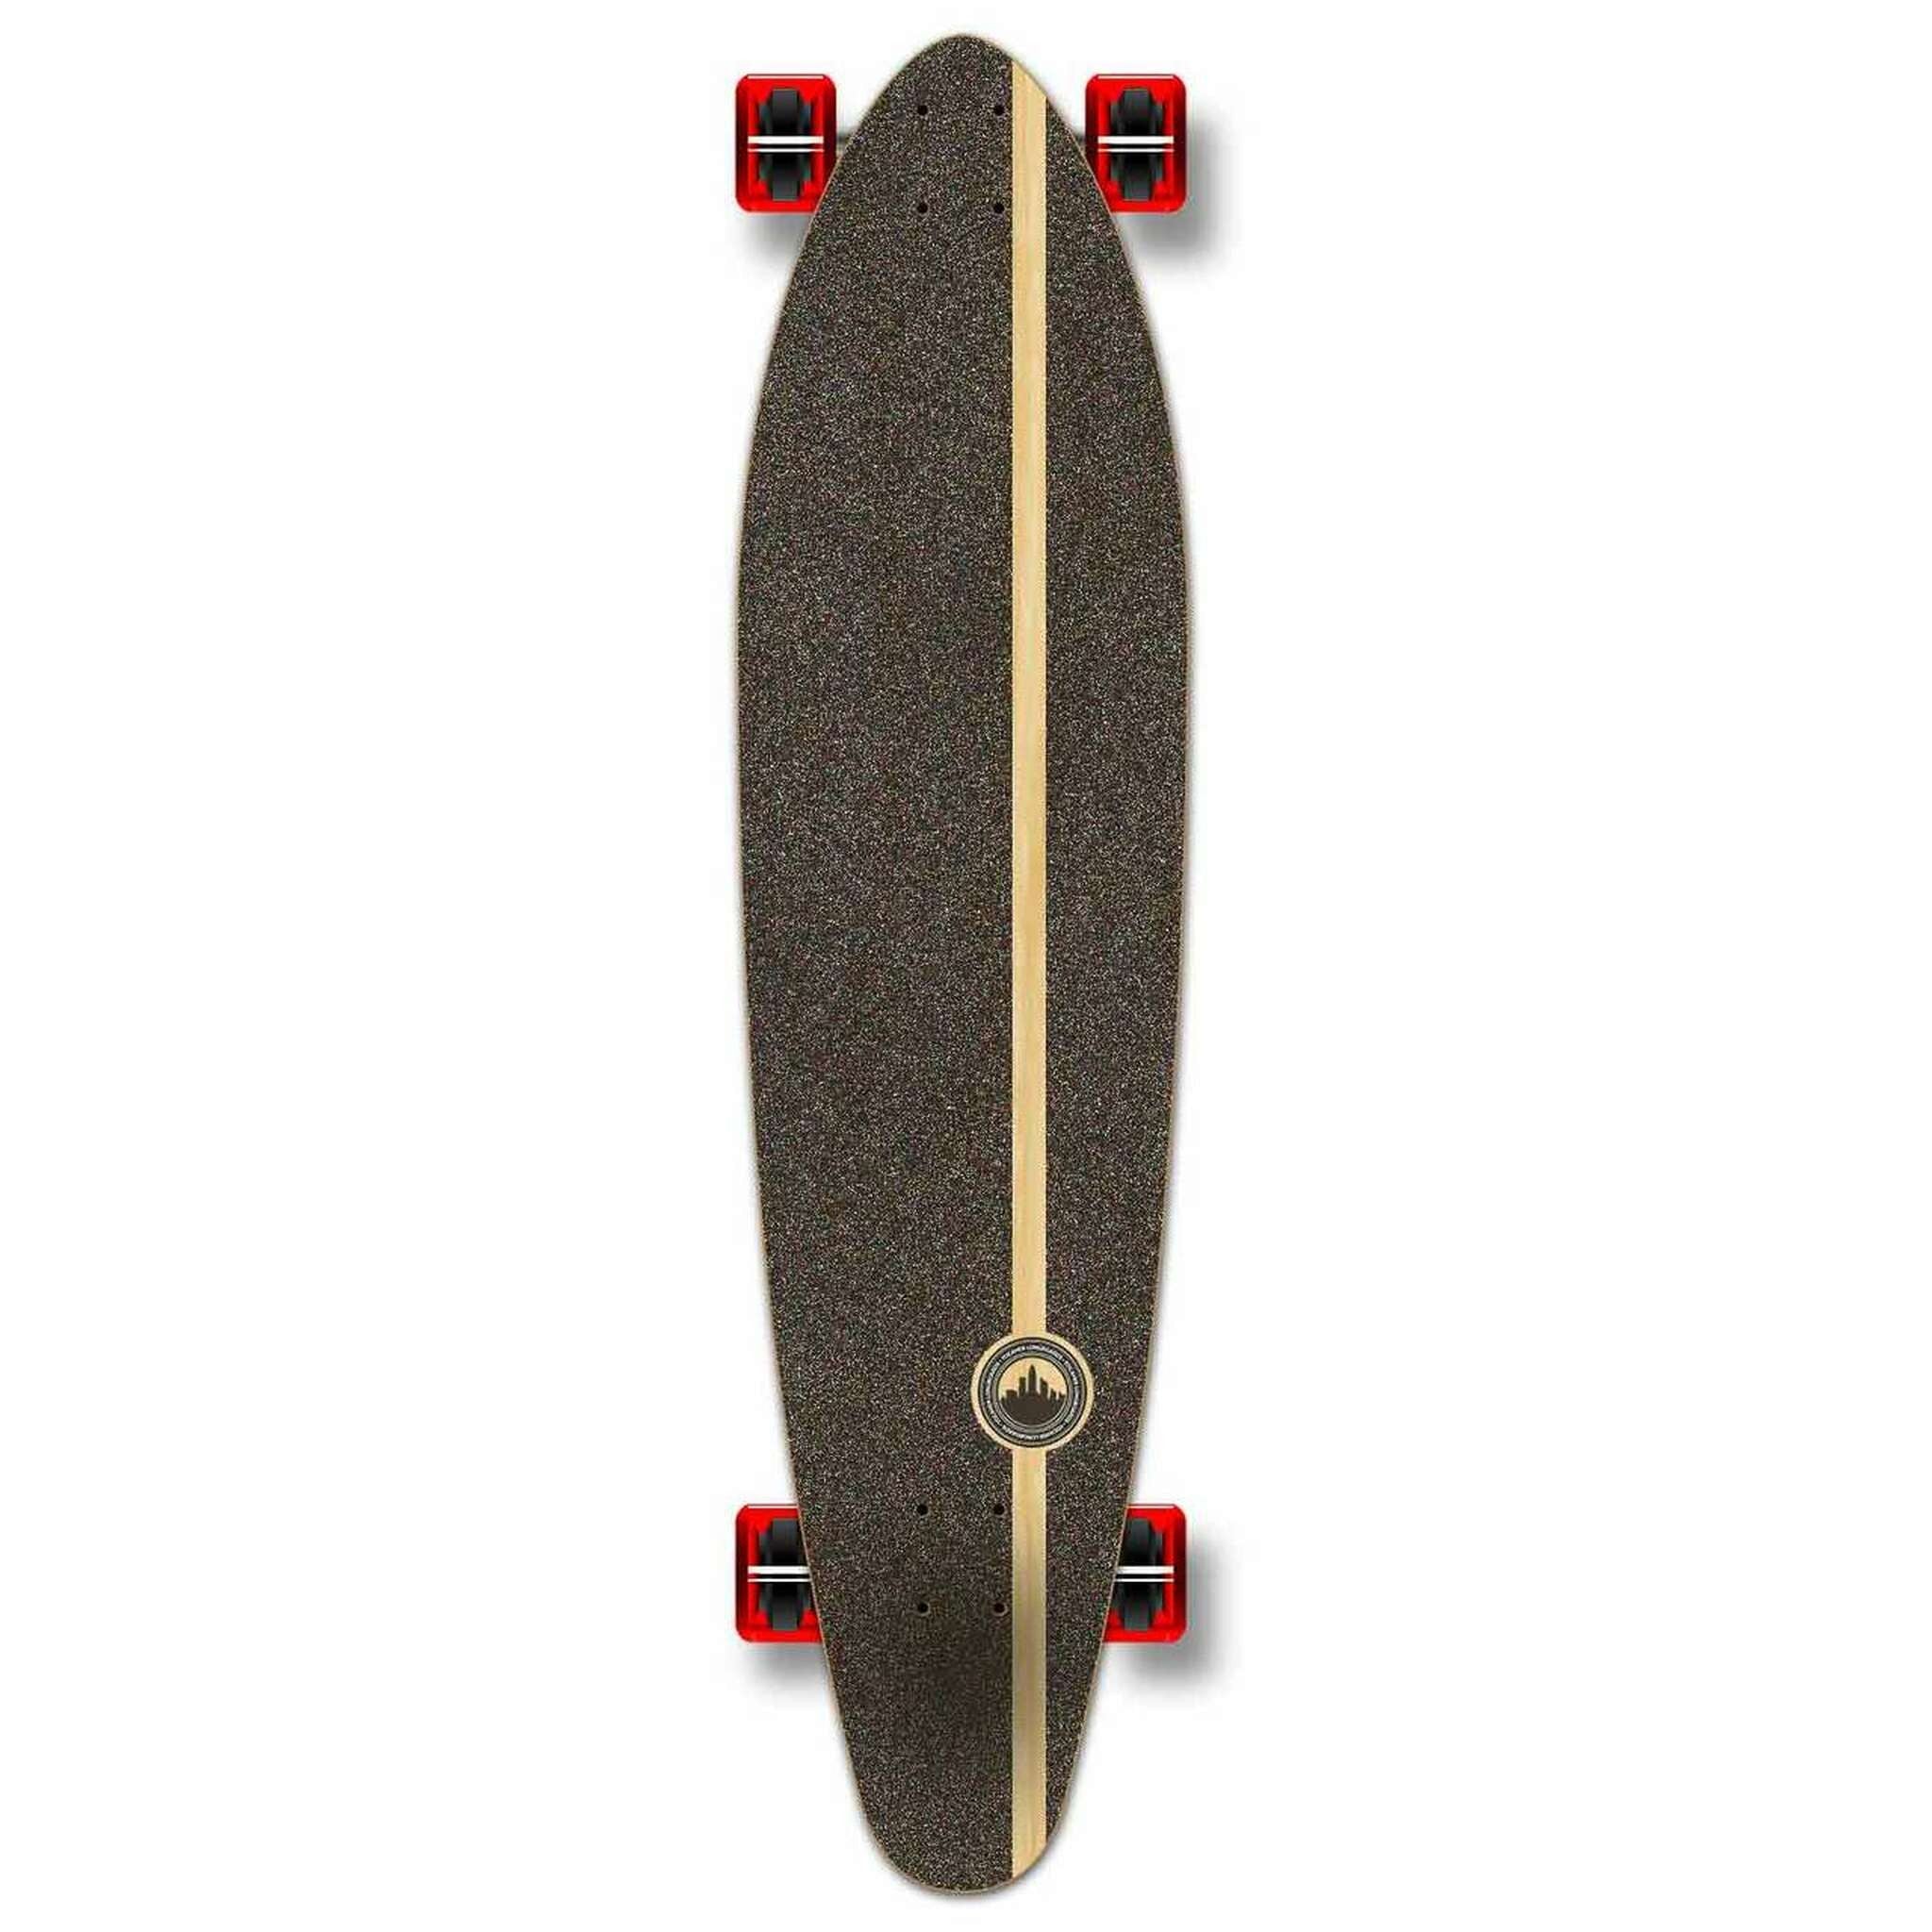 YOCAHER - Patriot Kicktail Longboard - Planche Complete